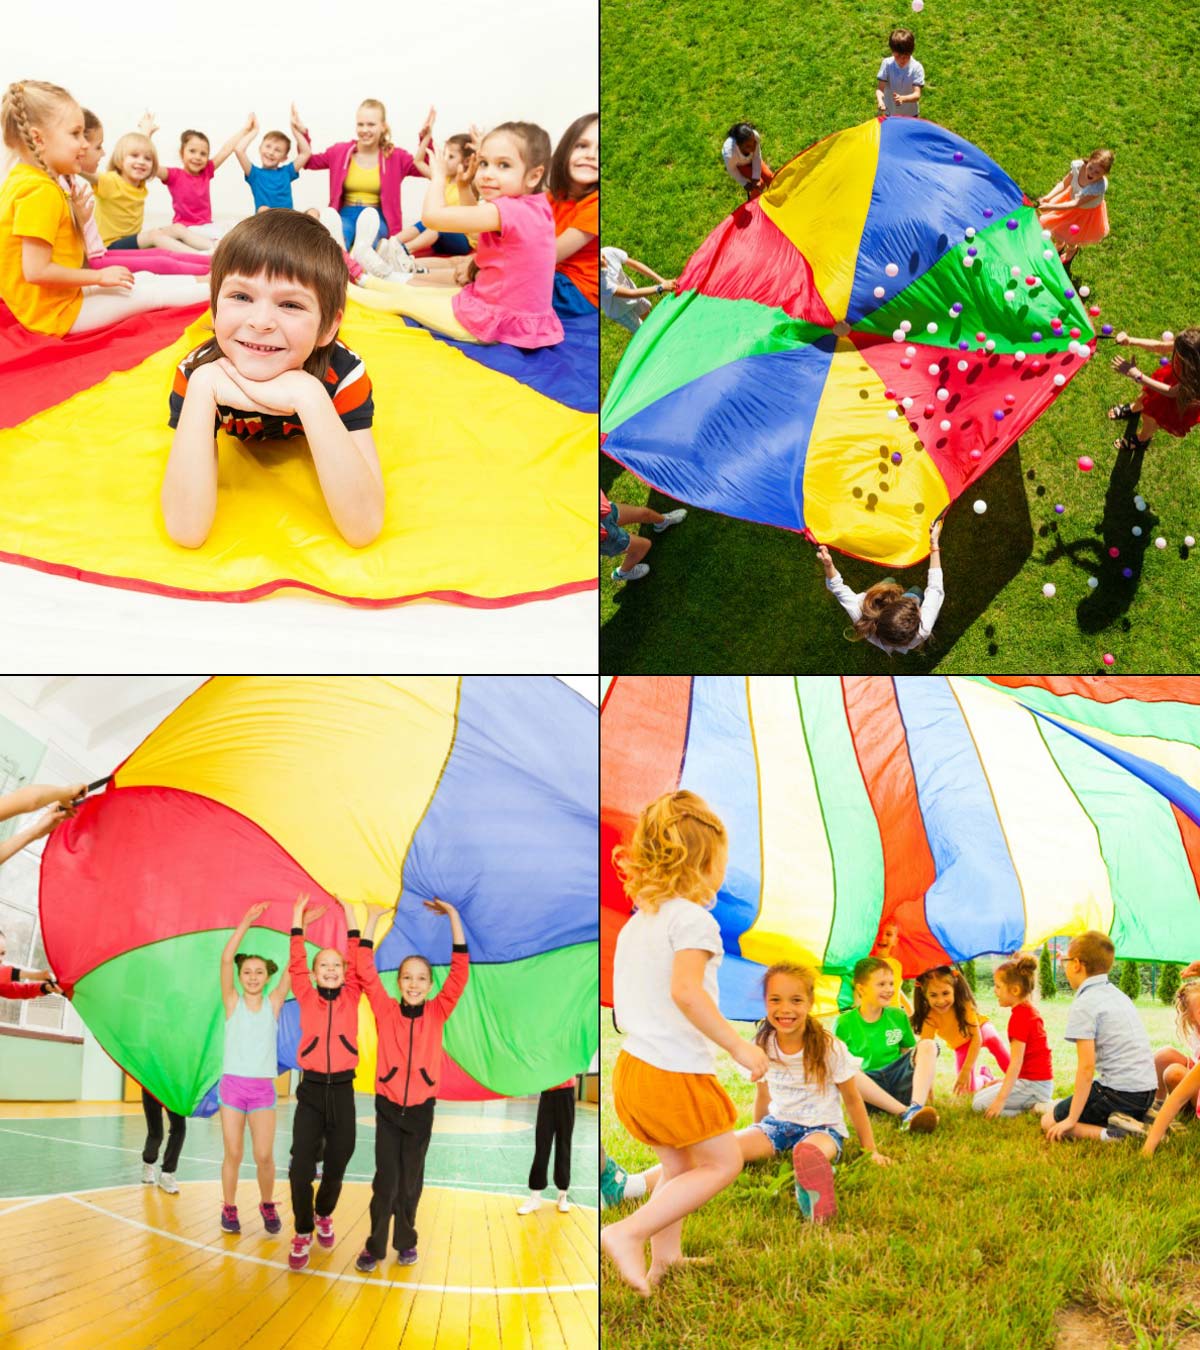 Development Exercise Group Activitie Rainbow Parachute Kids Play Outdoor Game 